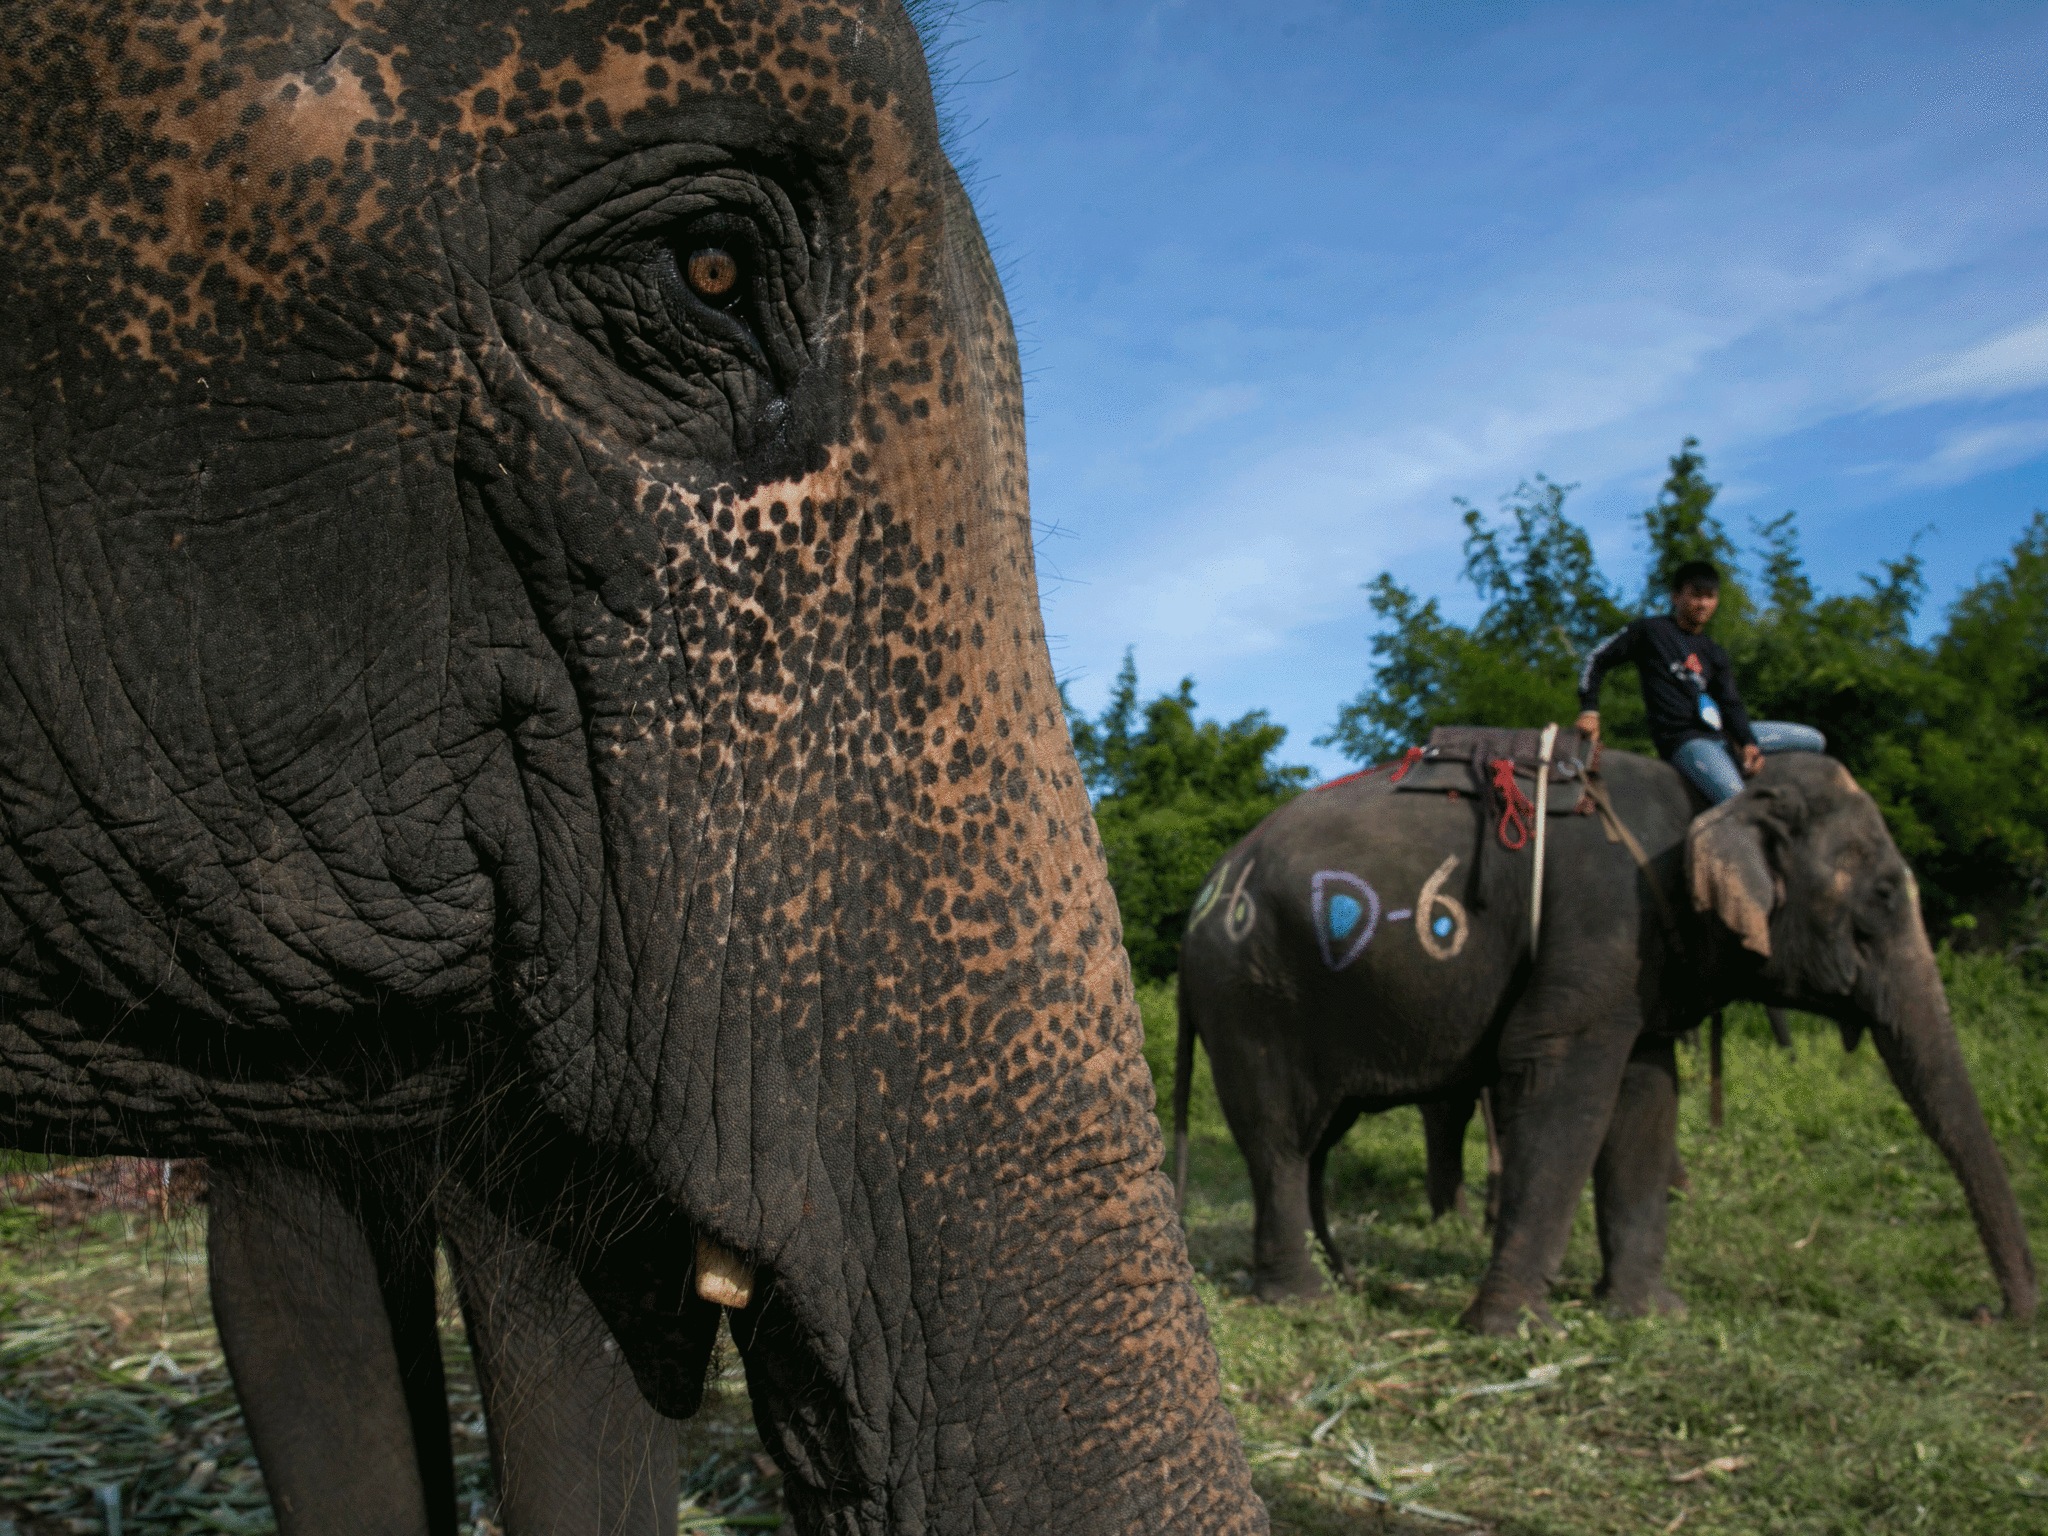 Elephant rides are a popular tourist attraction in Thailand